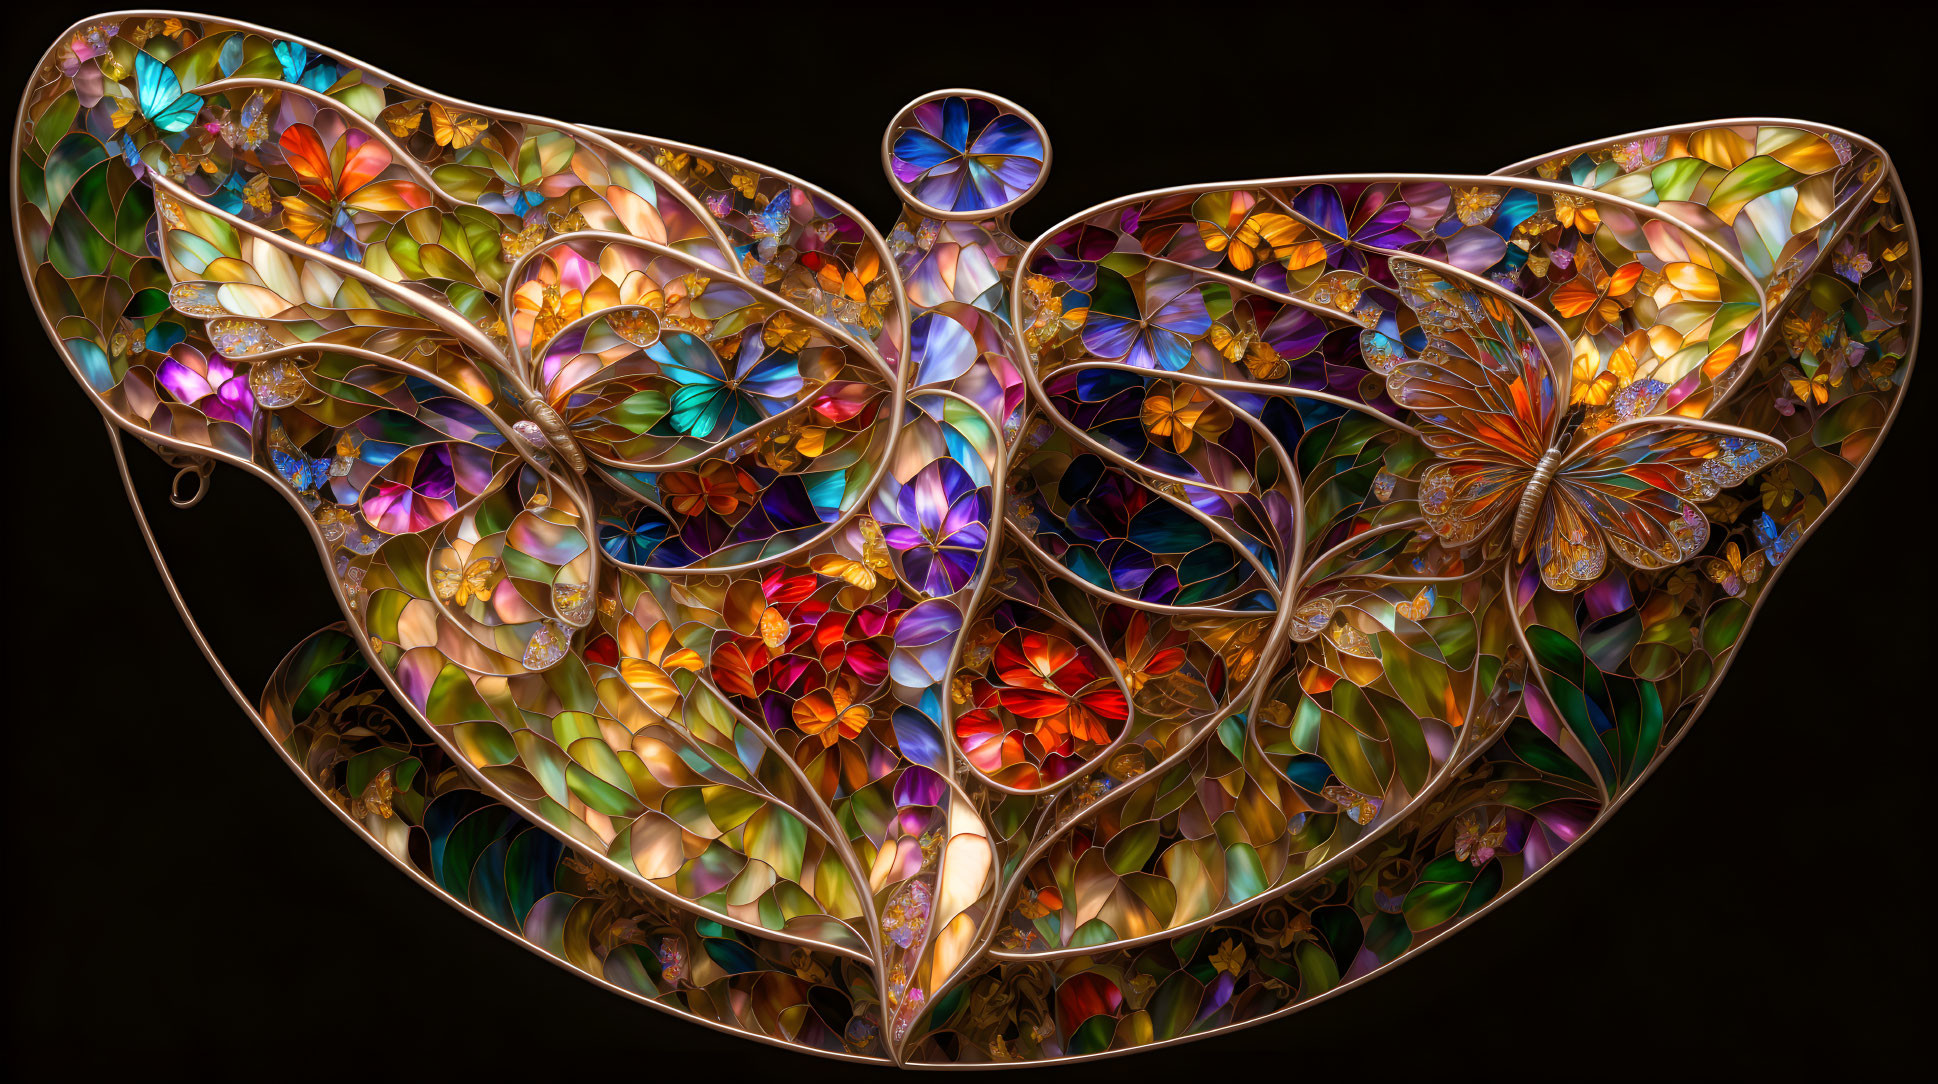 Colorful stained glass artwork with butterfly and floral motifs on dark background